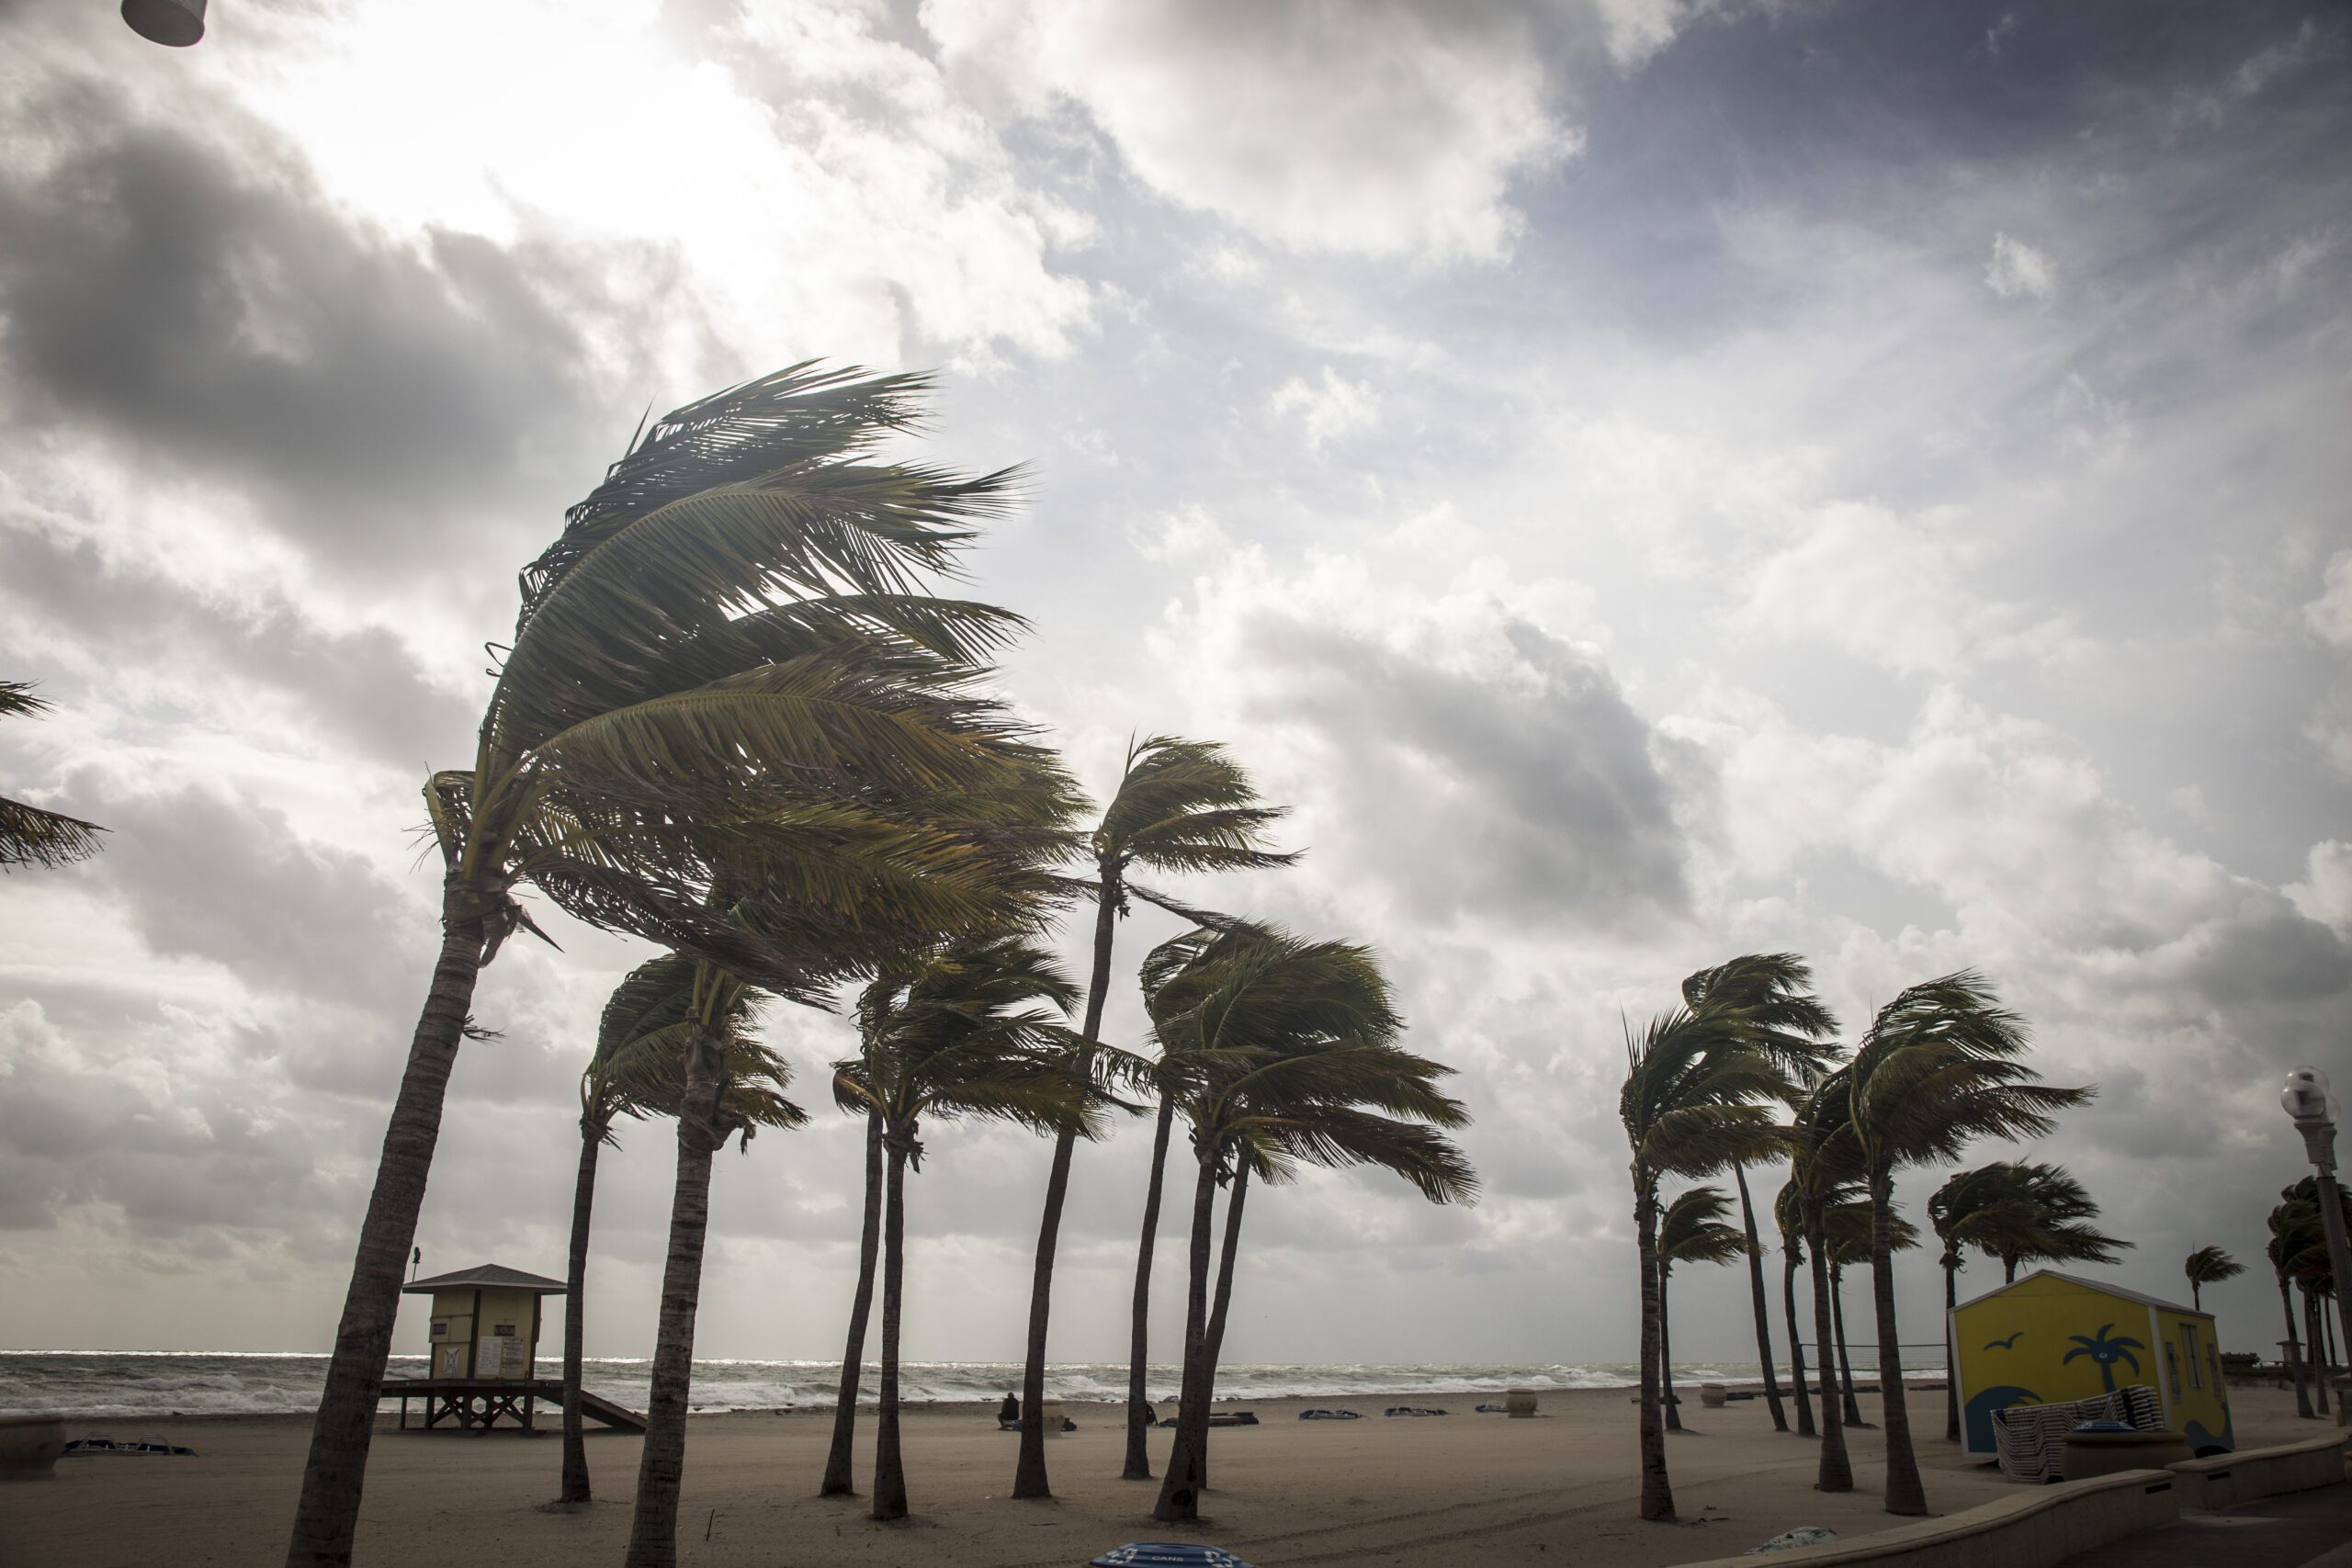 Palm trees blowing in high winds